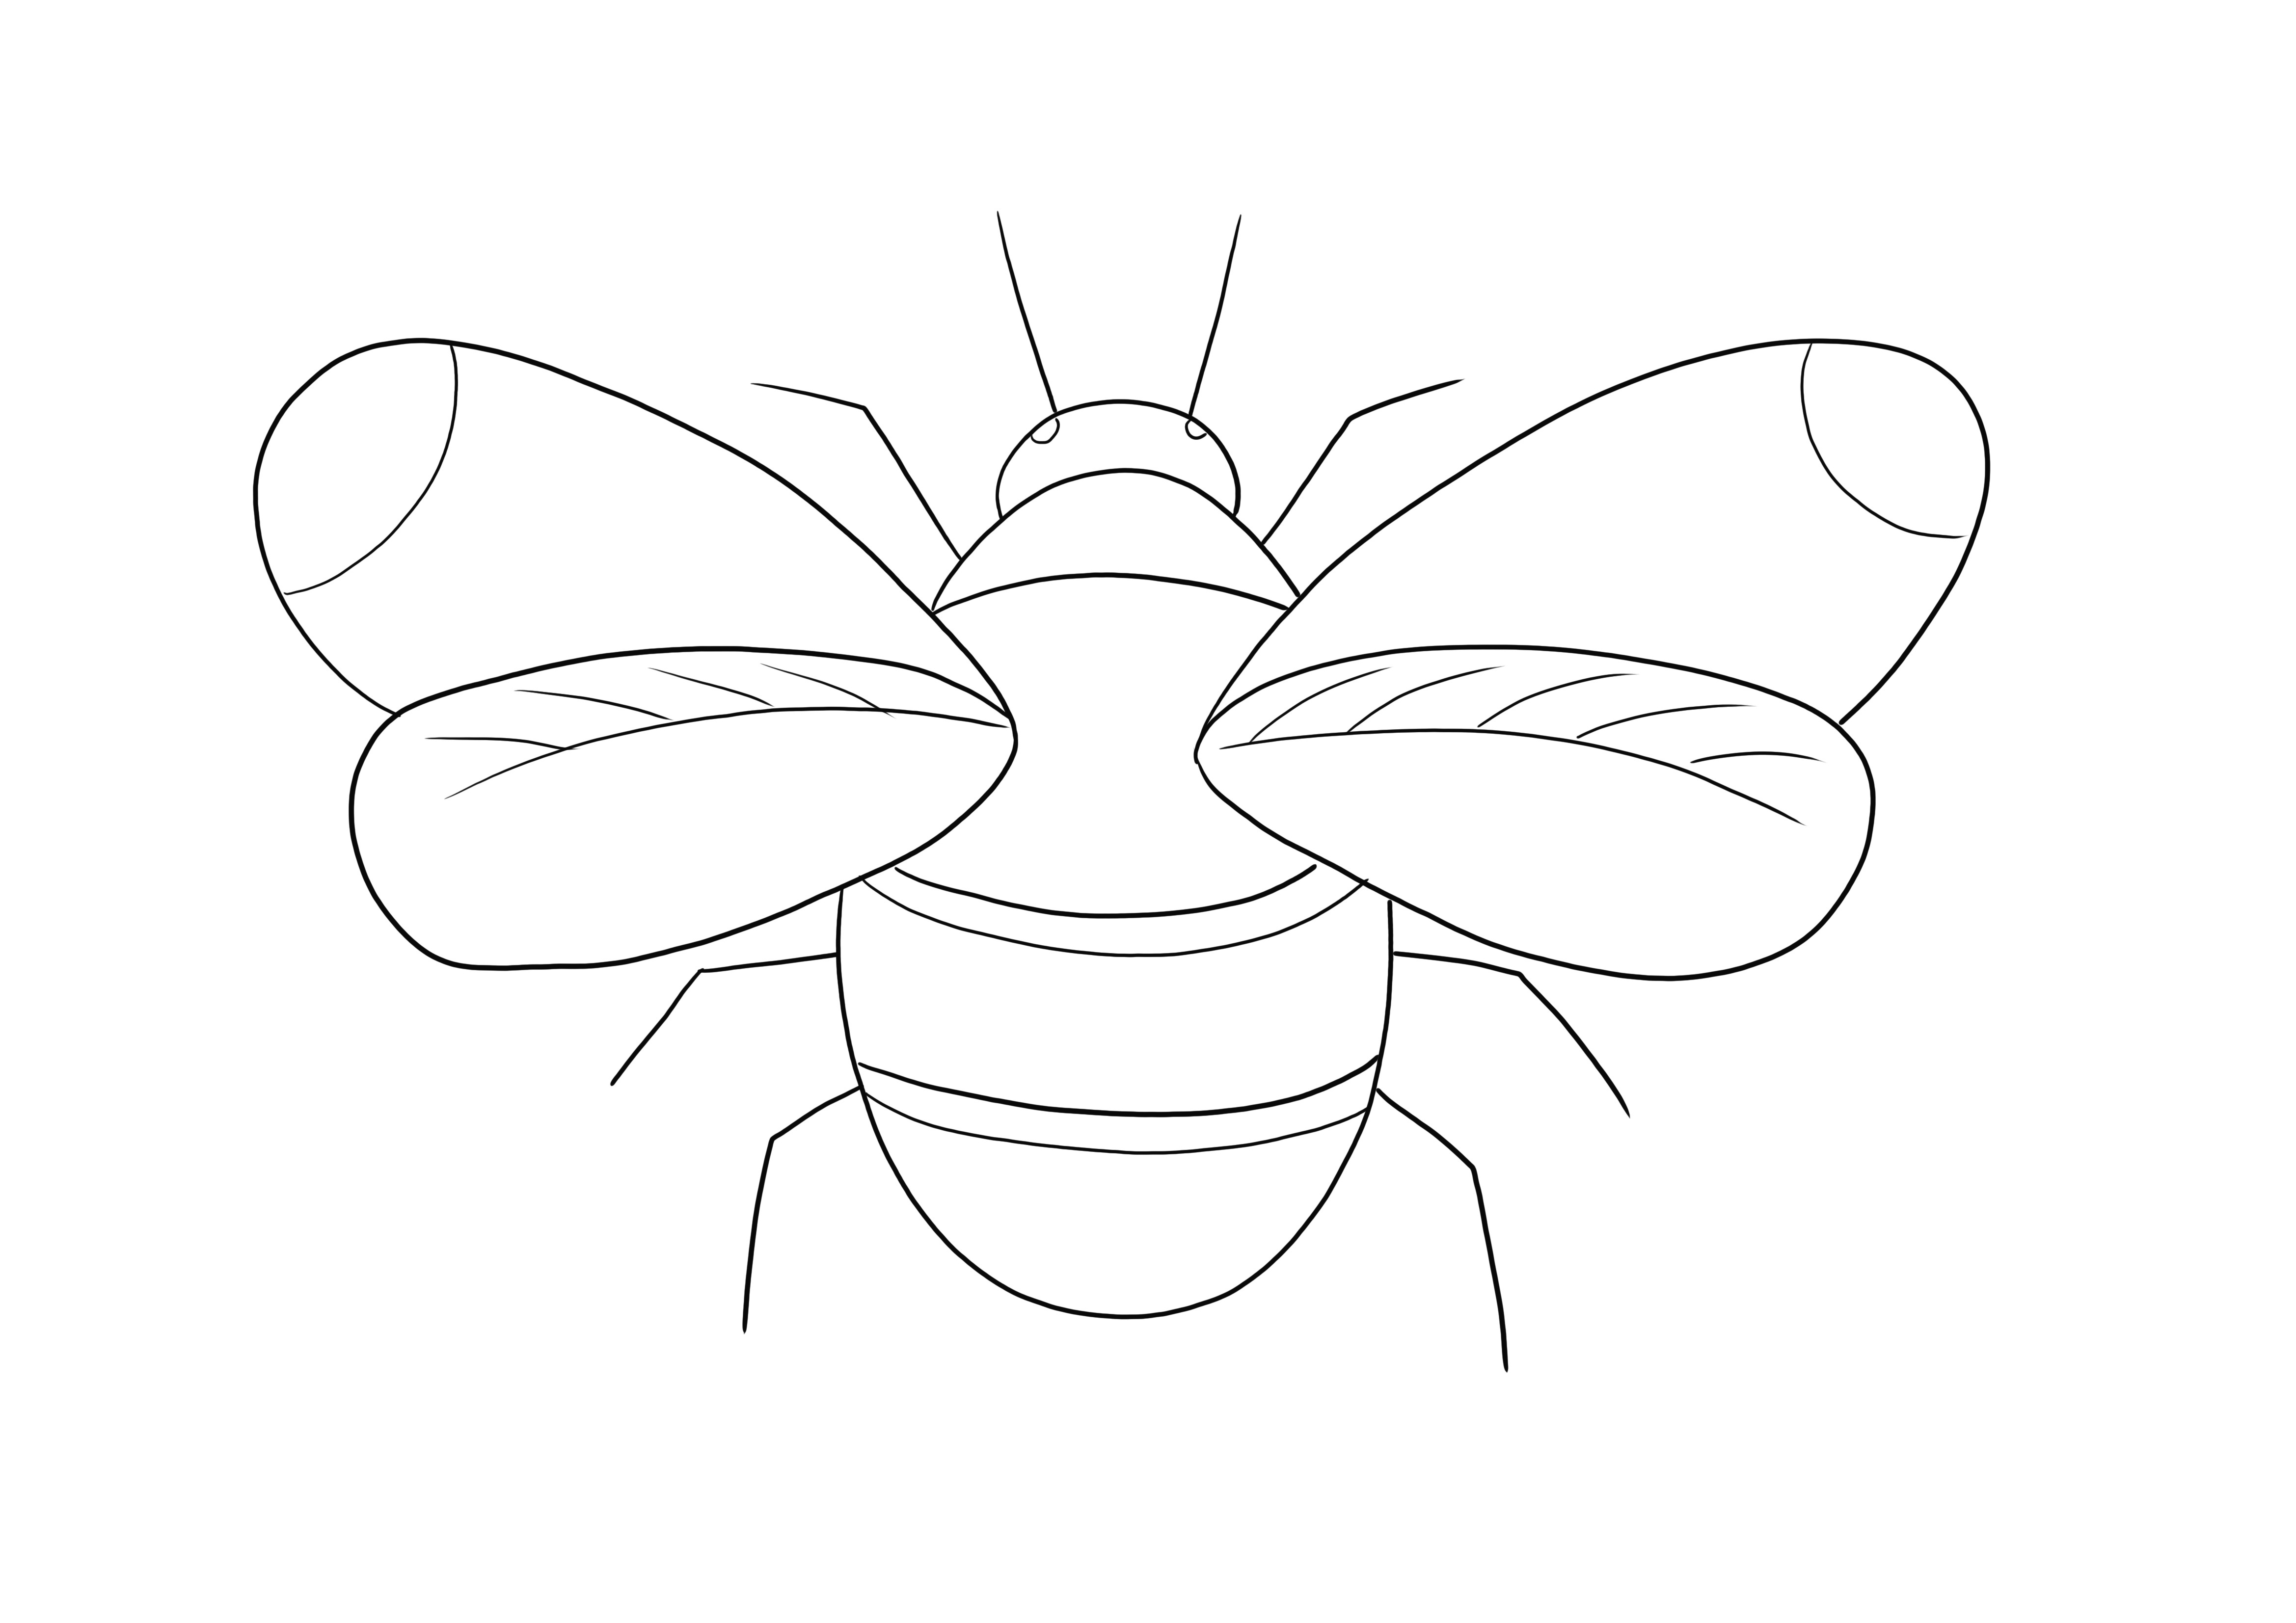 The Bumblebee coloring sheet is free to be downloaded or printed and colored